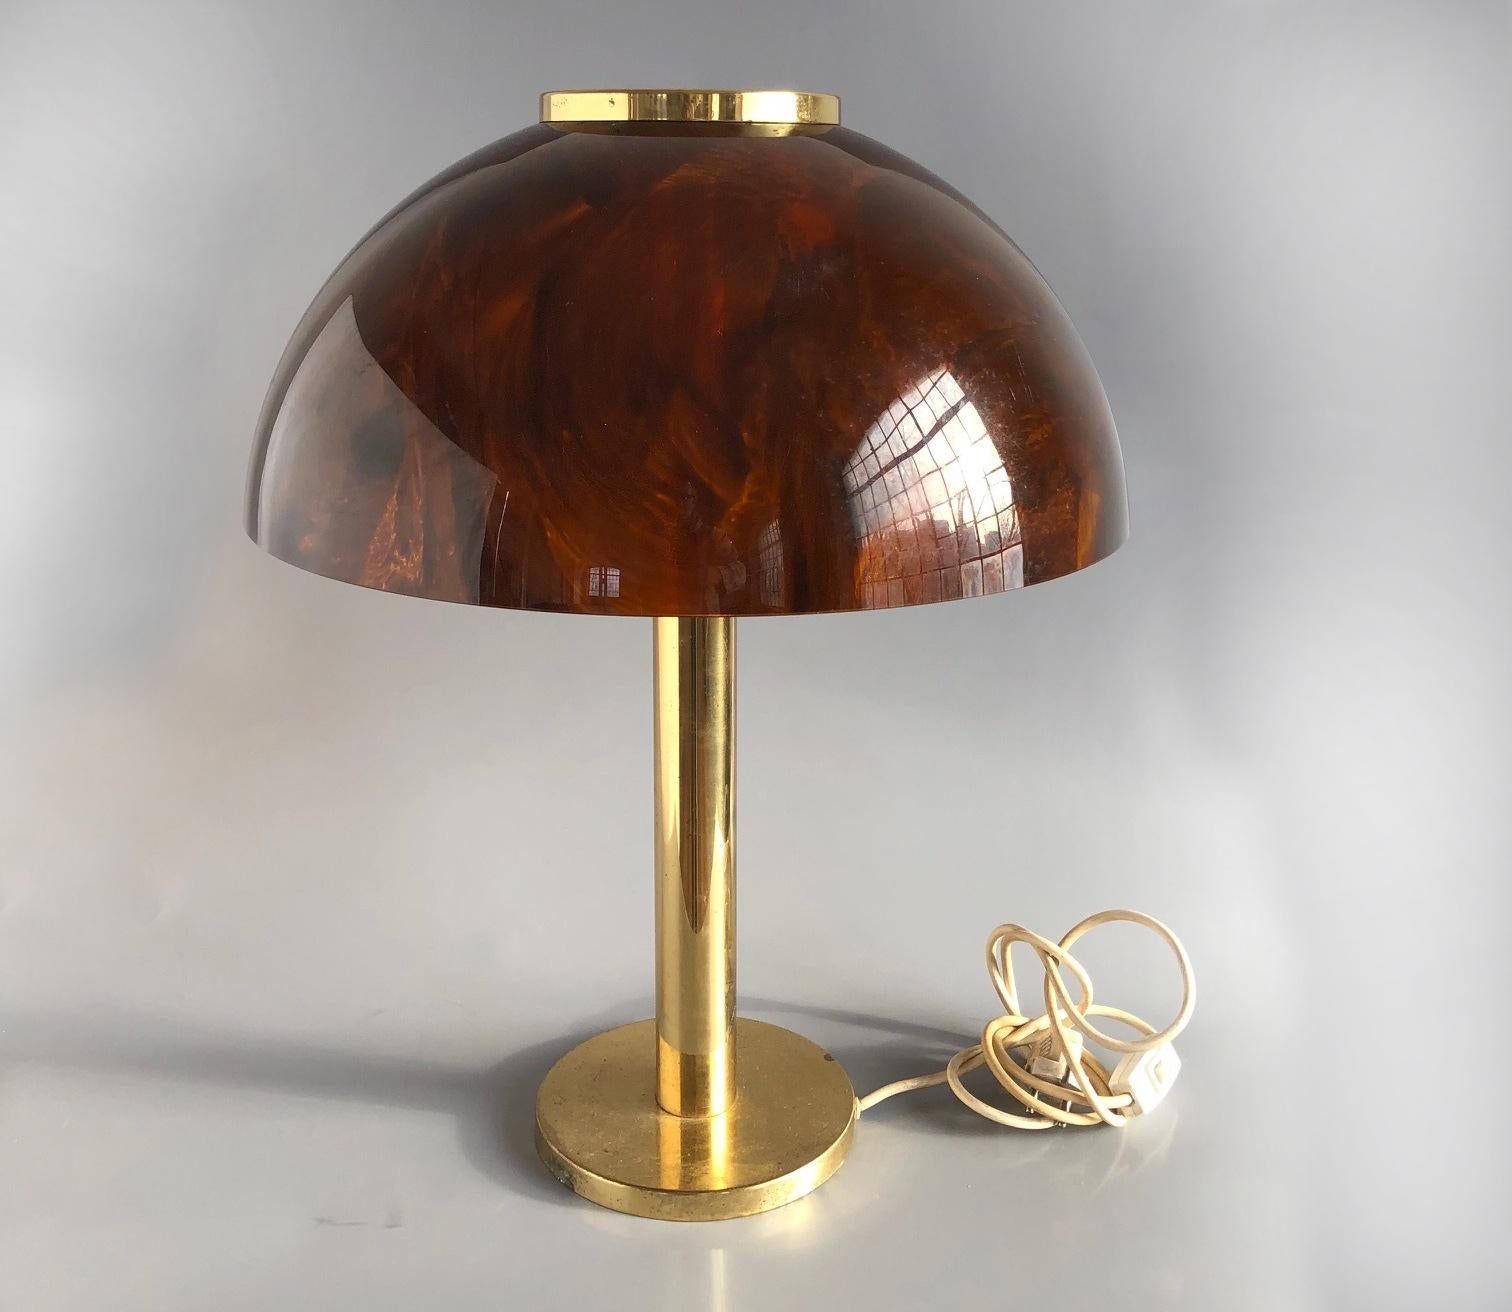 Nice form lamp with brownish shade that imitates turtle shell texture. Body in brass. Original condition. European plug.